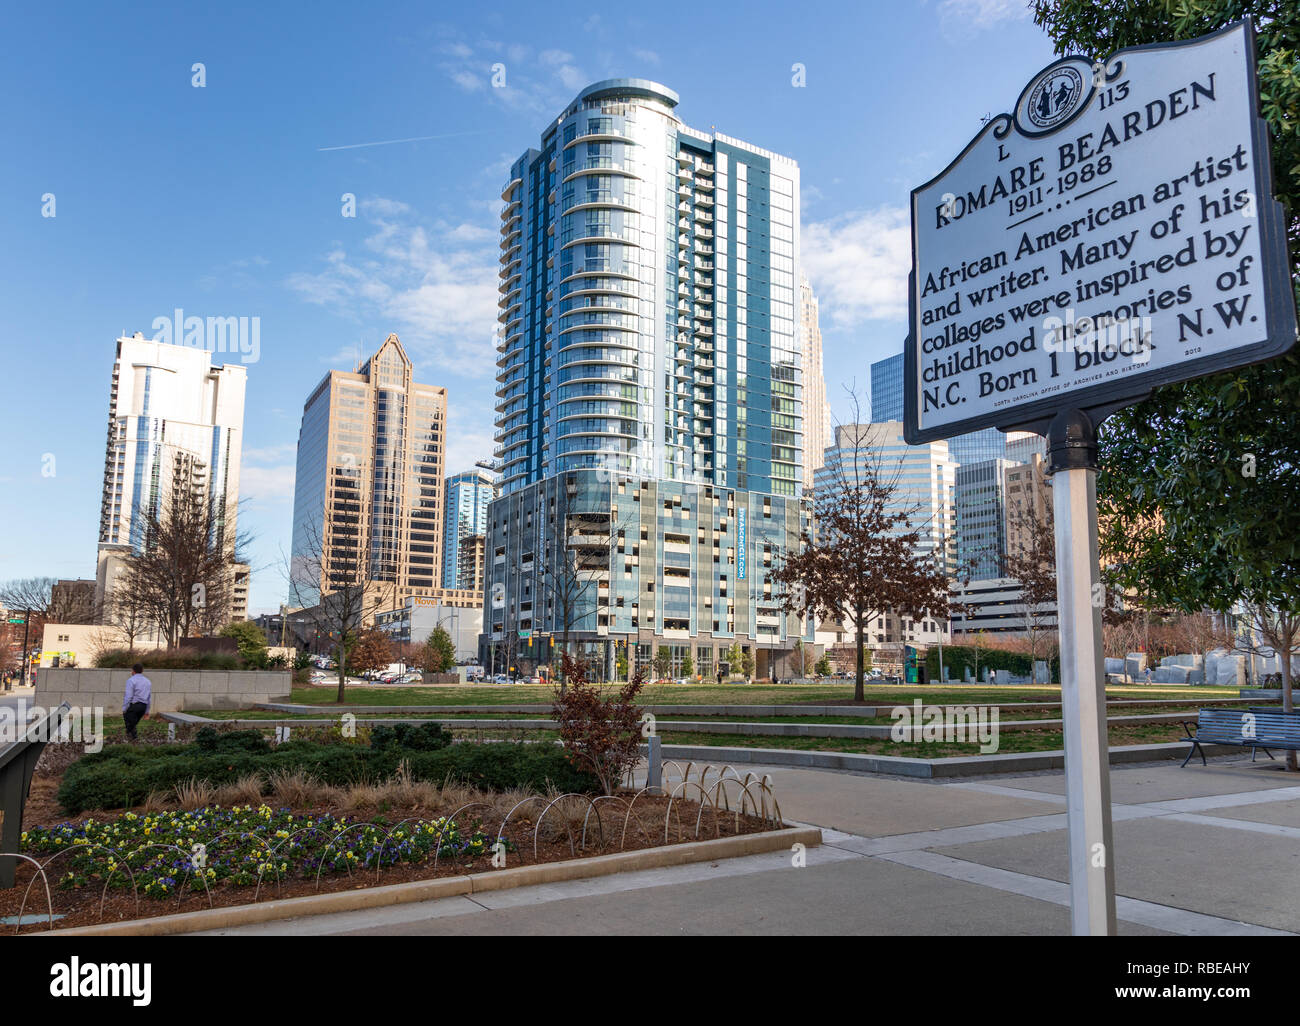 CHARLOTTE, NC, USA-1/8/19: Romare Bearden Park & informational sign about the artist for whom the park was named. Stock Photo